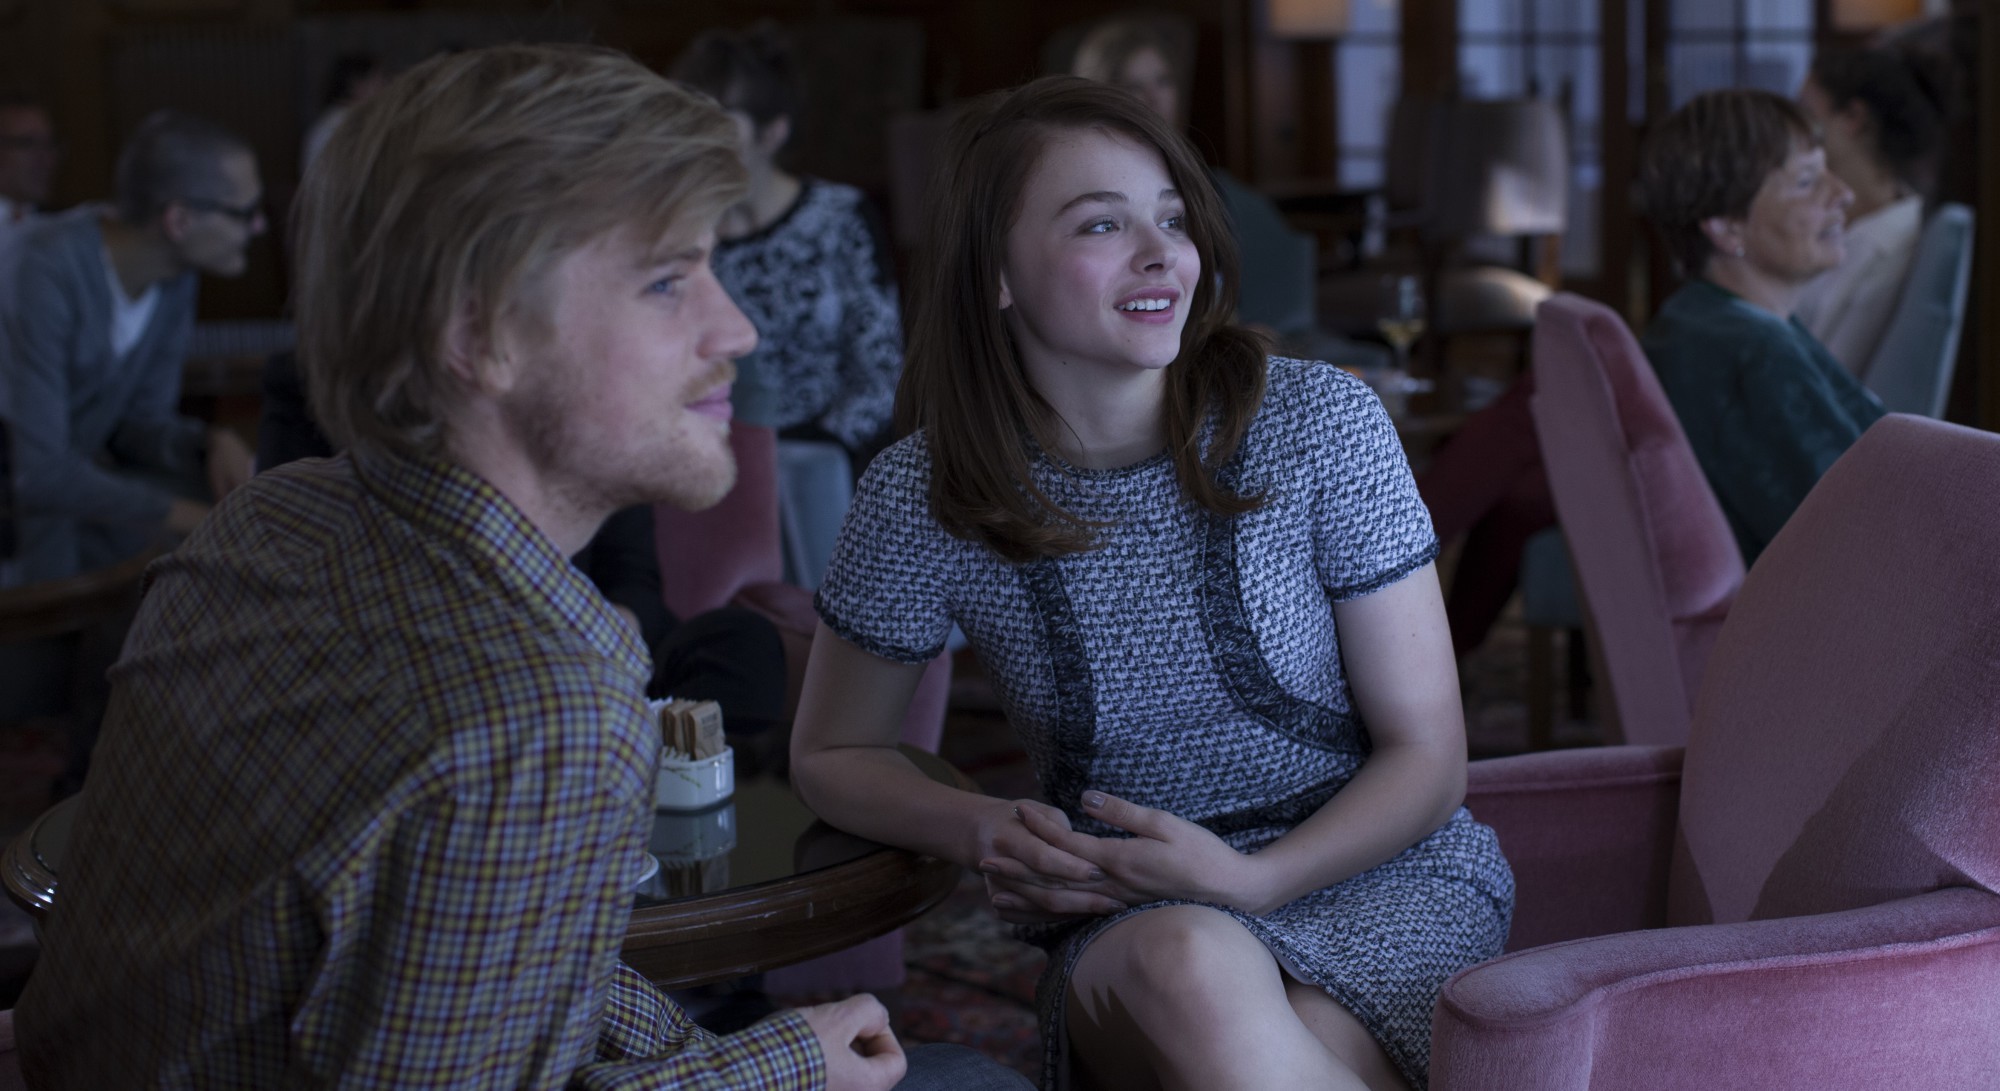 Still of Chloë Grace Moretz and Johnny Flynn in Clouds of Sils Maria (2014)